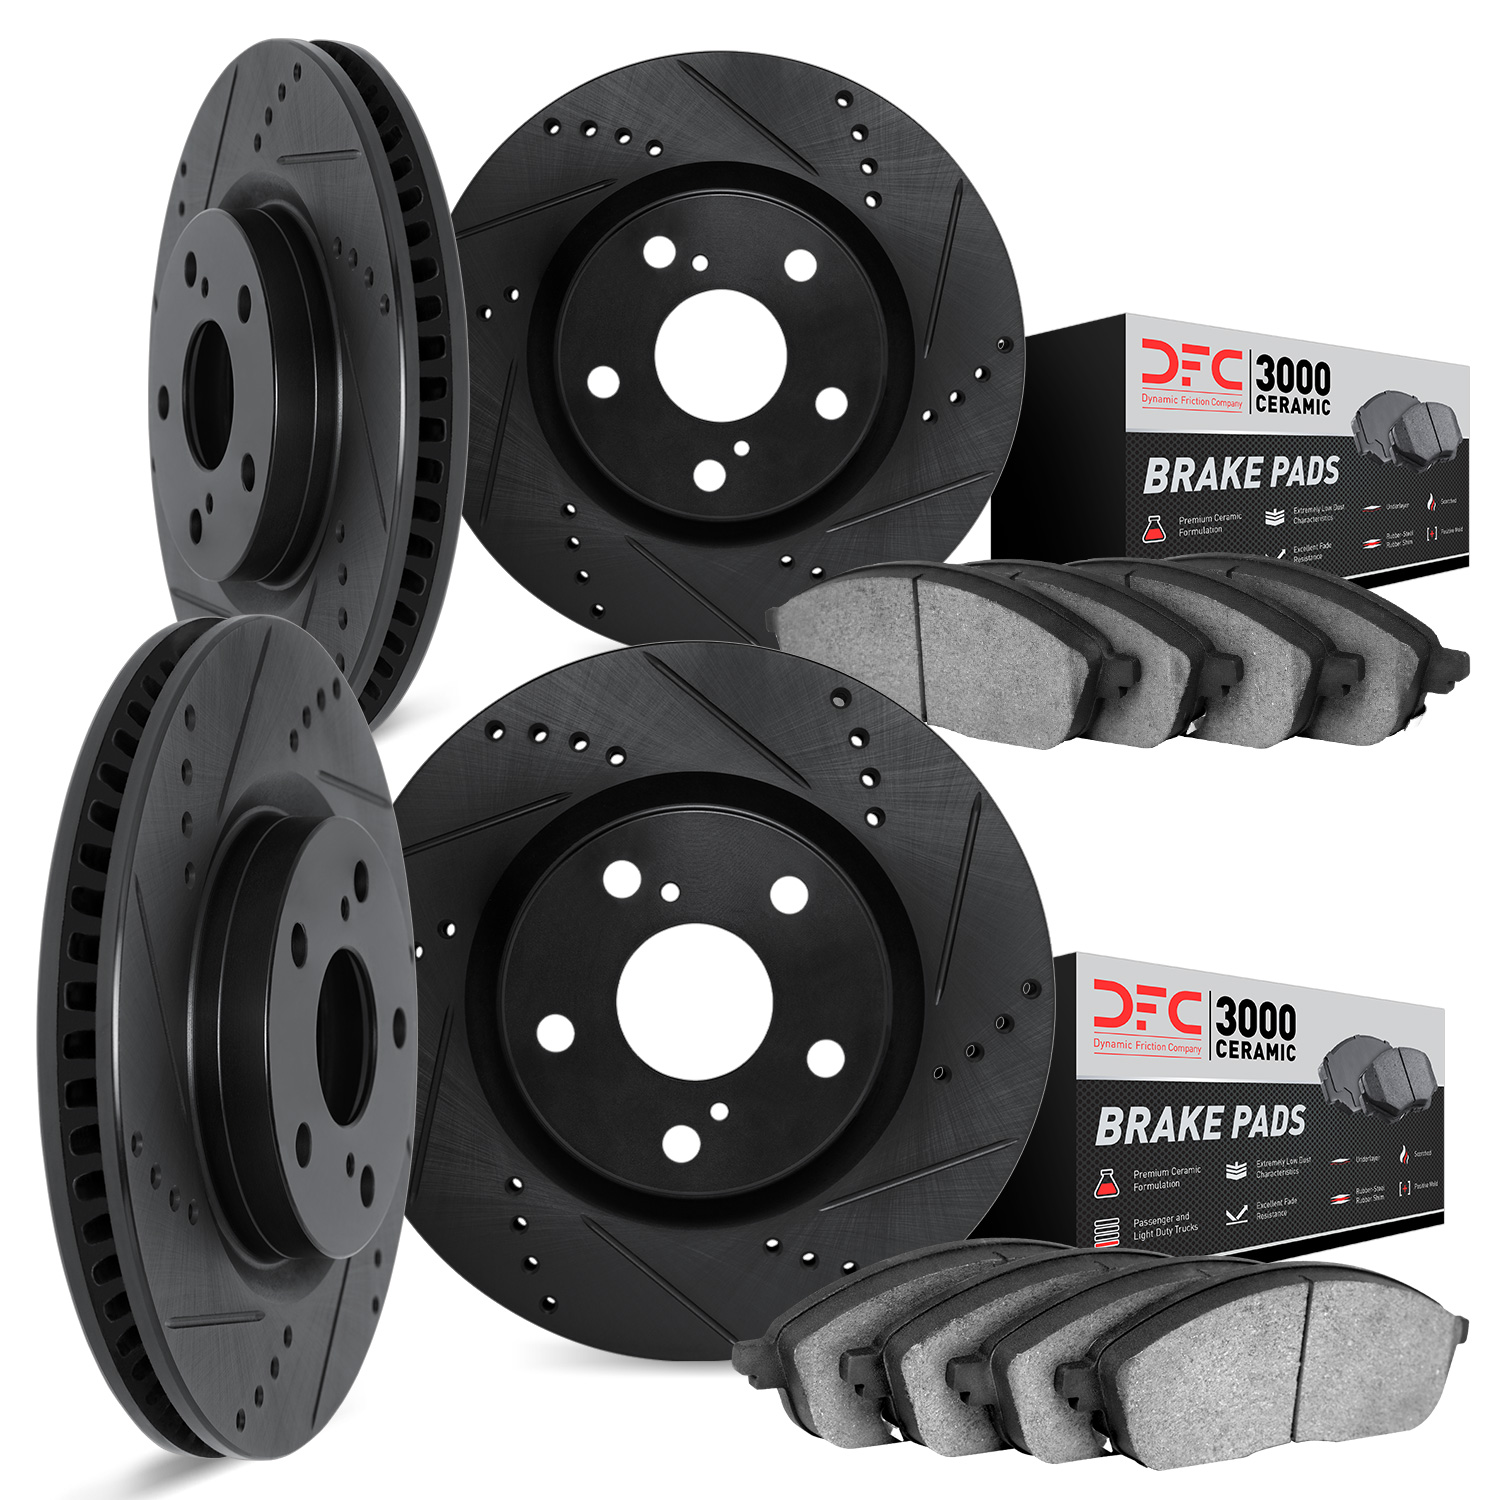 8304-47005 Drilled/Slotted Brake Rotors with 3000-Series Ceramic Brake Pads Kit [Black], 1978-1981 GM, Position: Front and Rear